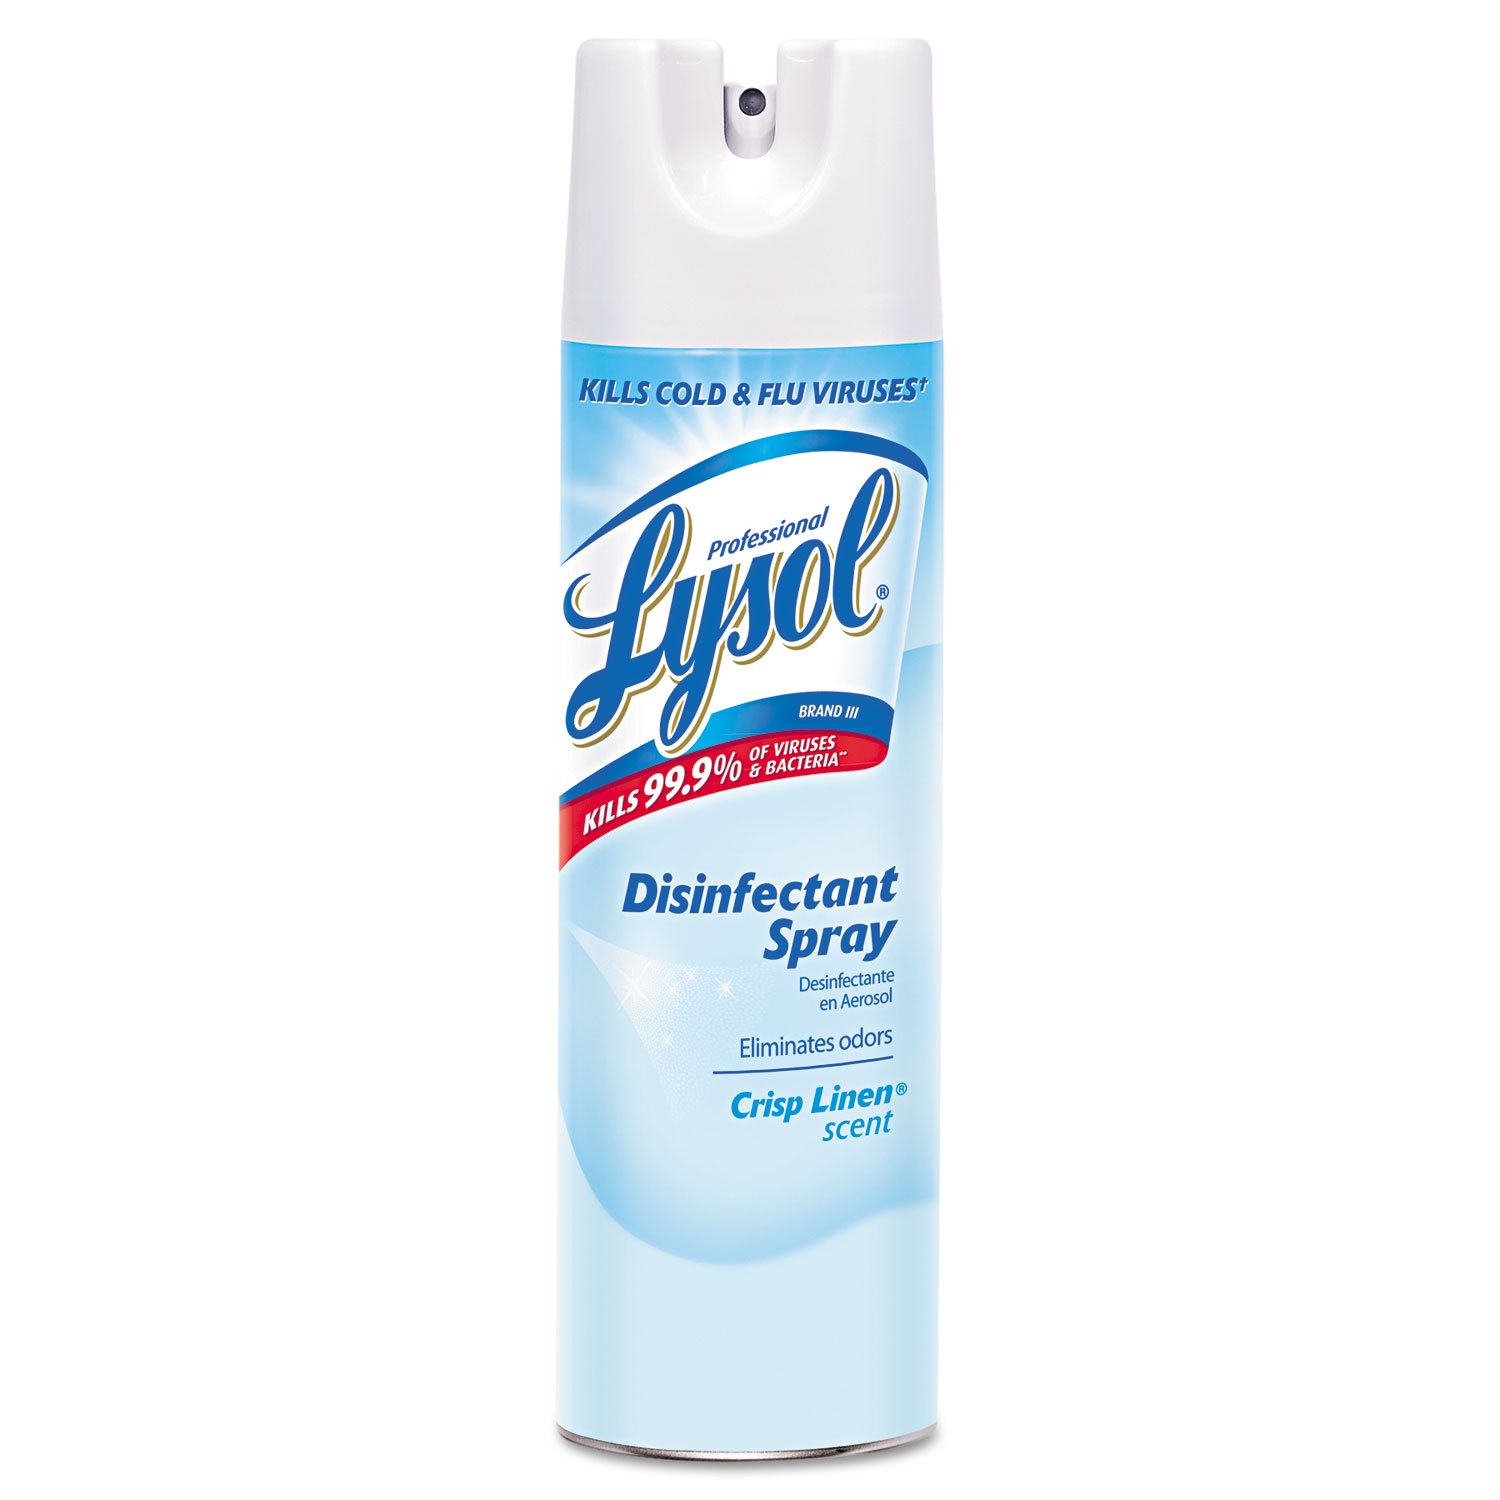 DISINFECTANT,SPRAY,LYSOL,CL 12 CT